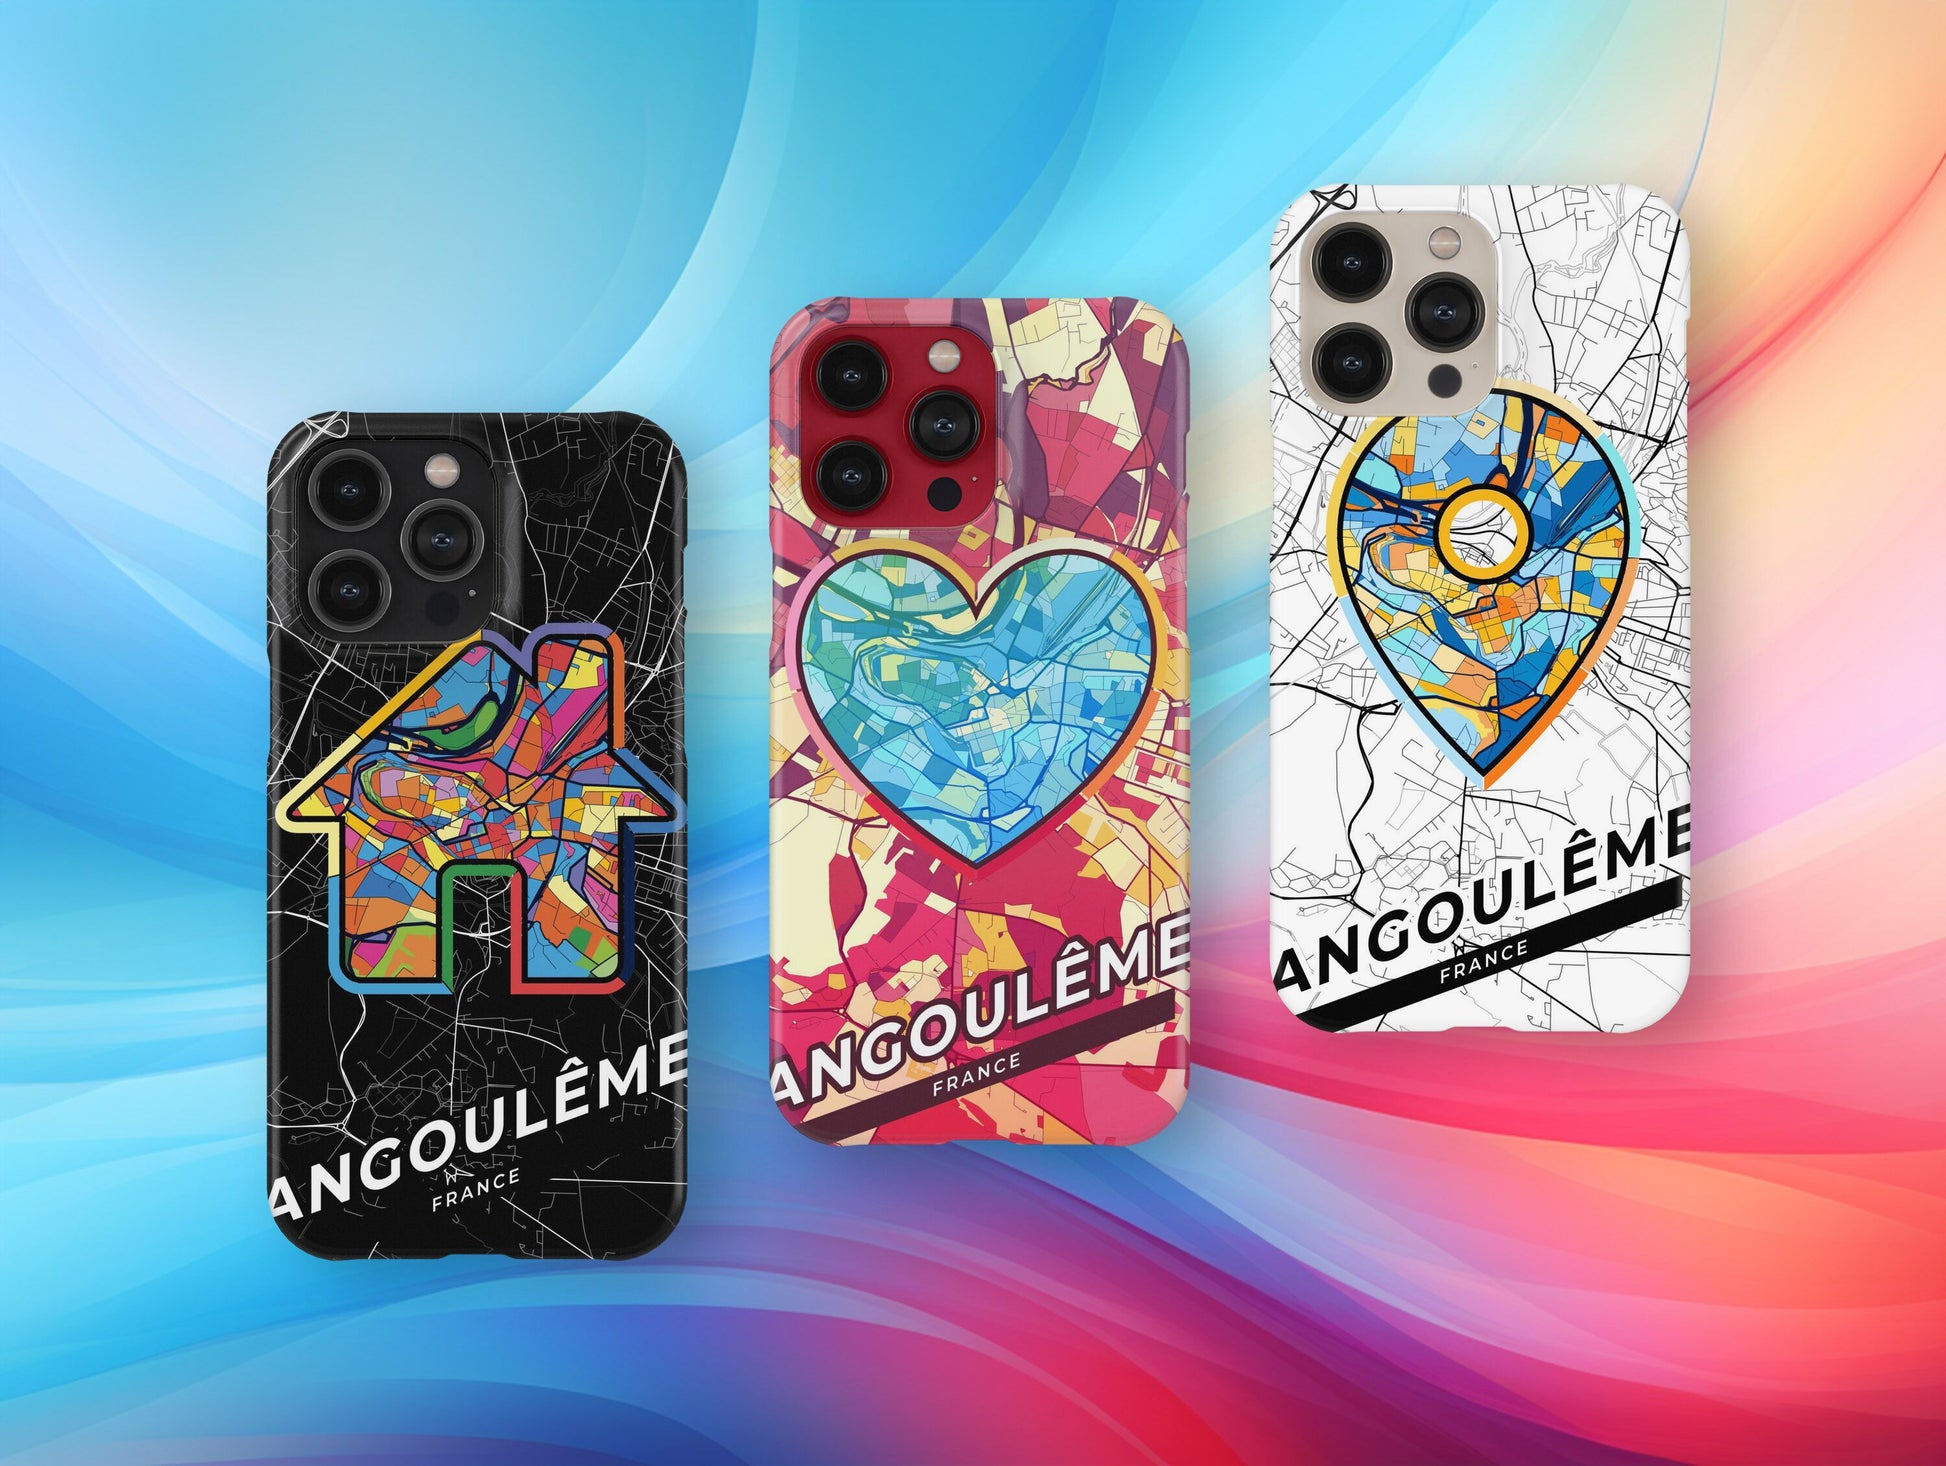 Angoulême France slim phone case with colorful icon. Birthday, wedding or housewarming gift. Couple match cases.